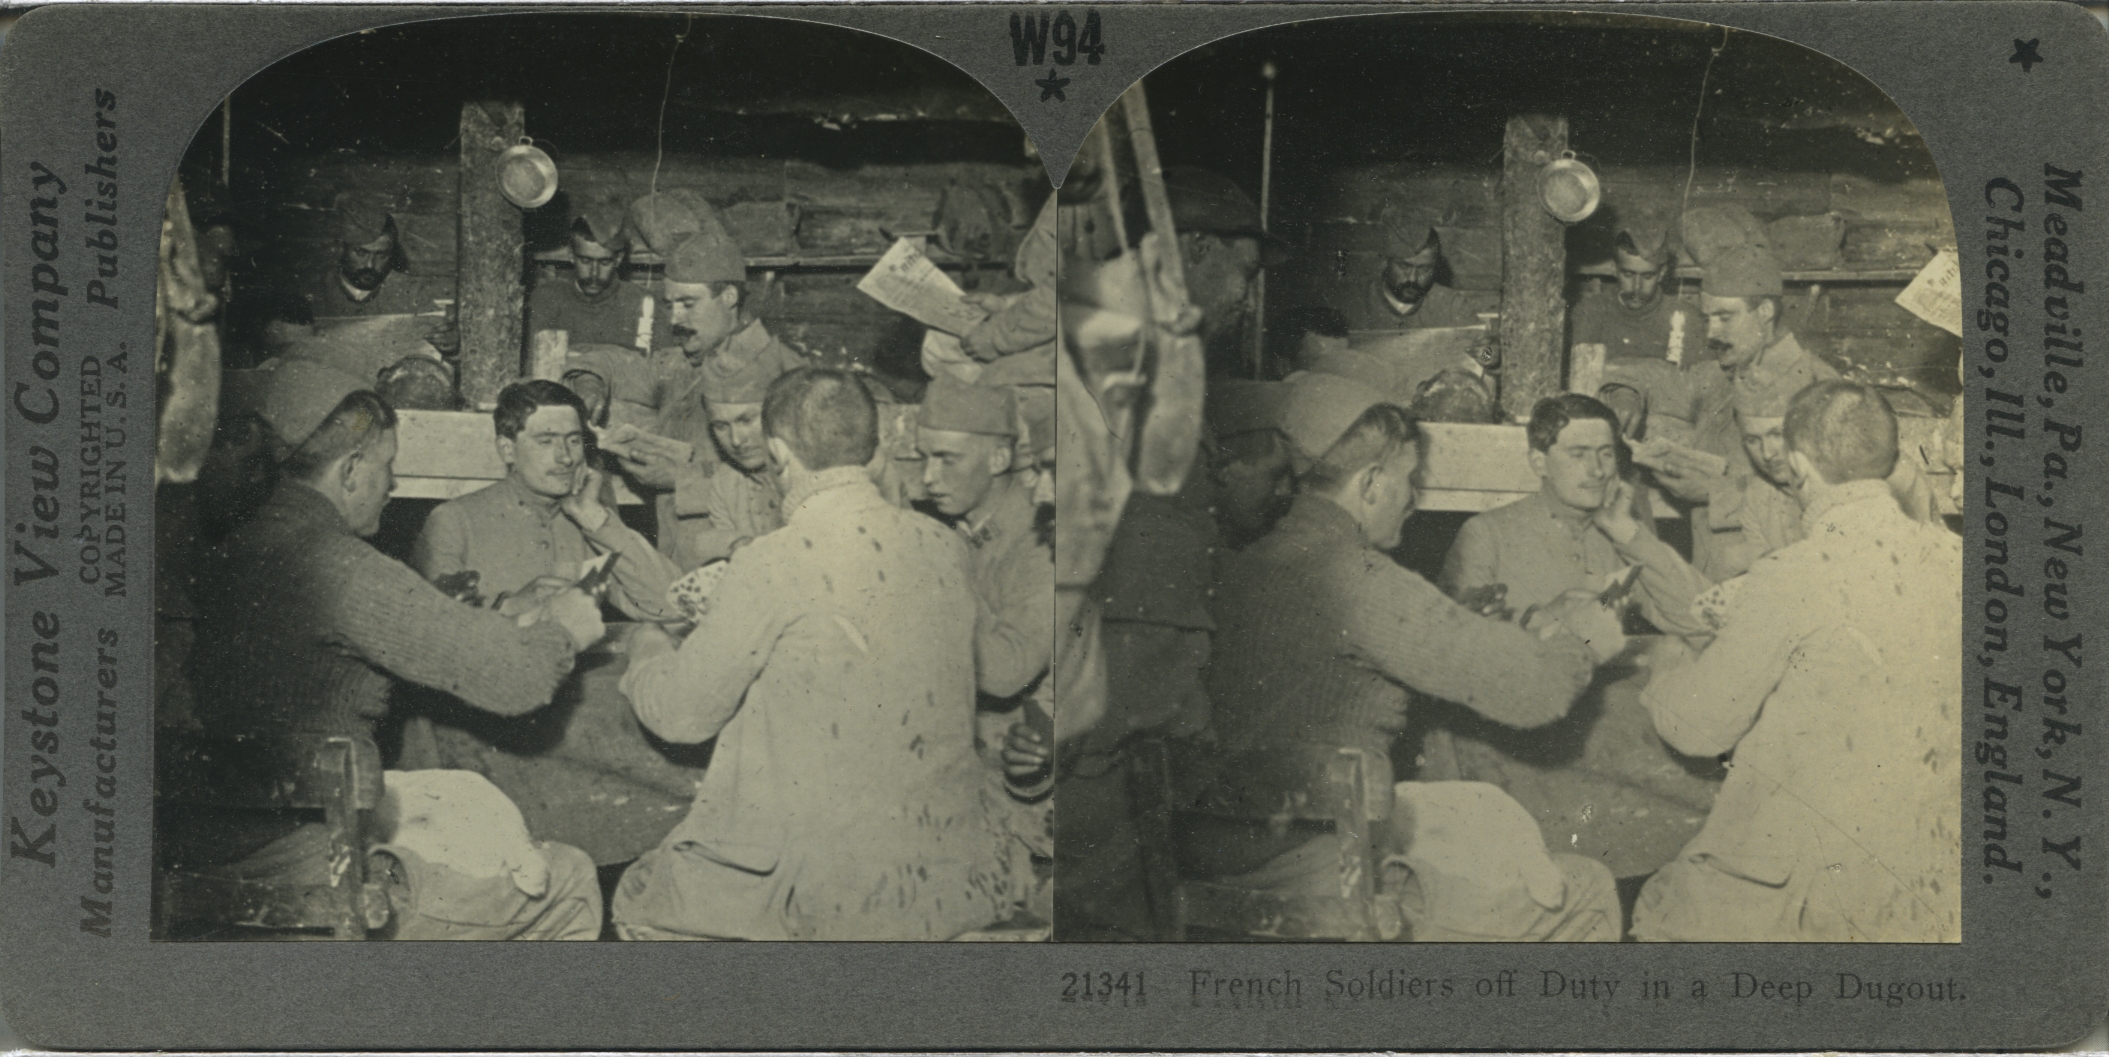 French Soldiers off Duty in a Deep Dugout